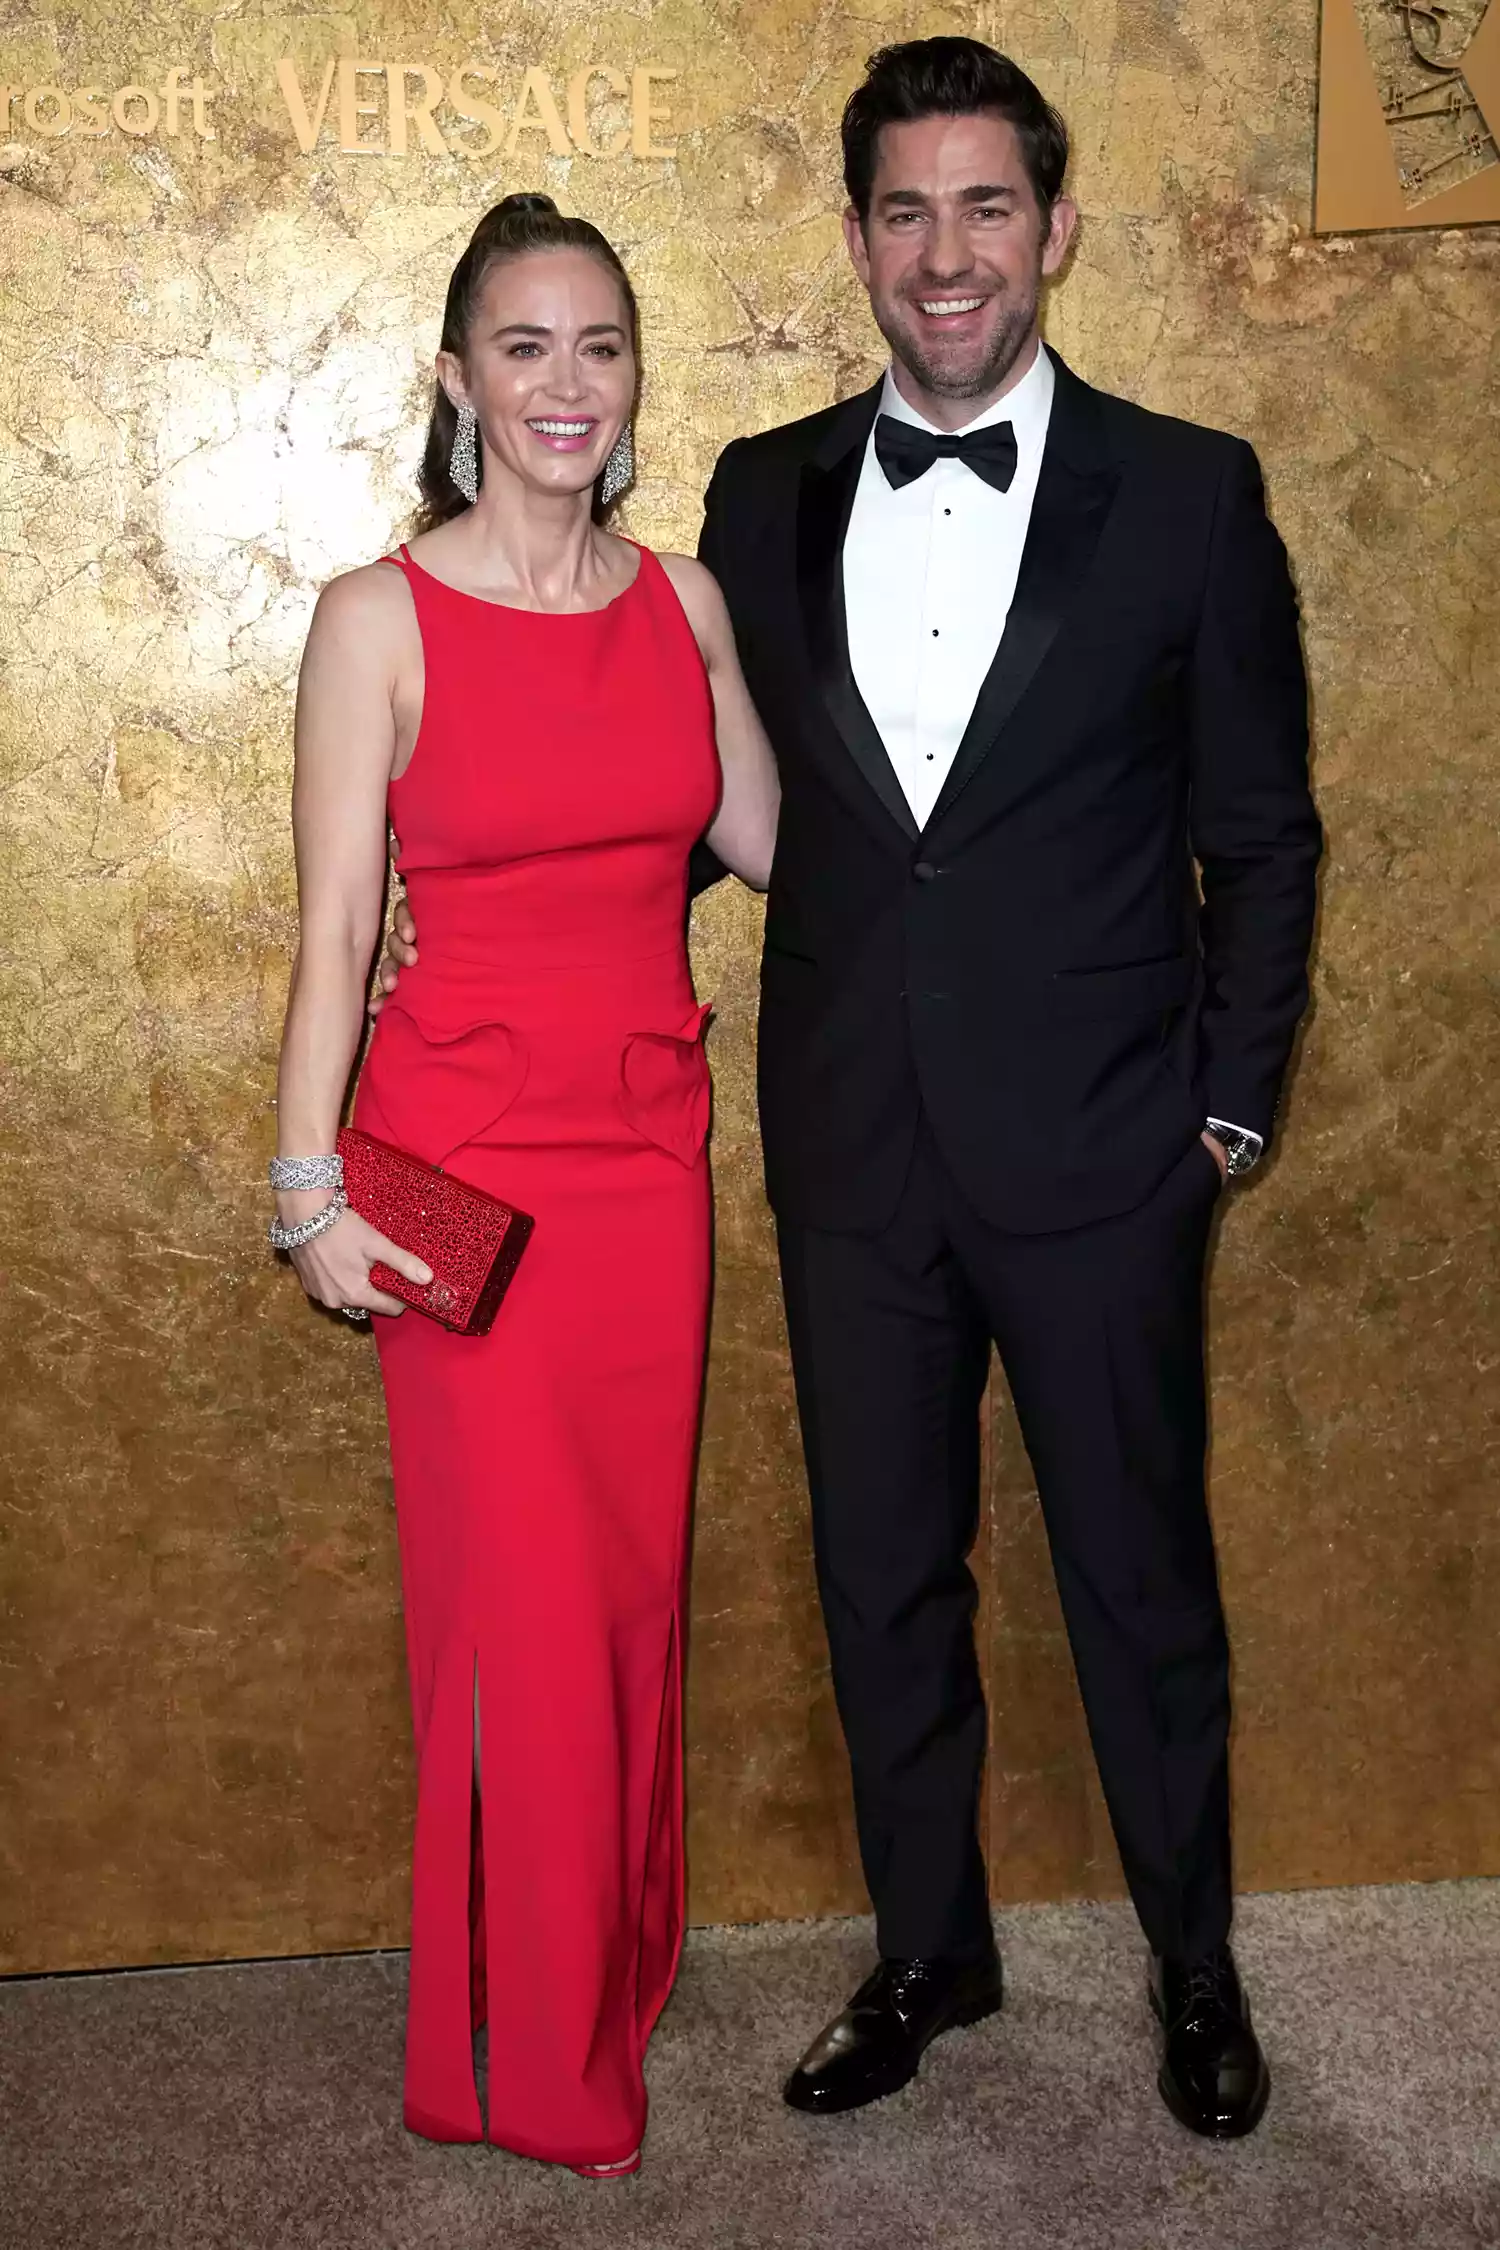 Dazzling Duo Emily Blunt and John Krasinski Command the Red Carpet in Coordinated Style at The Albies